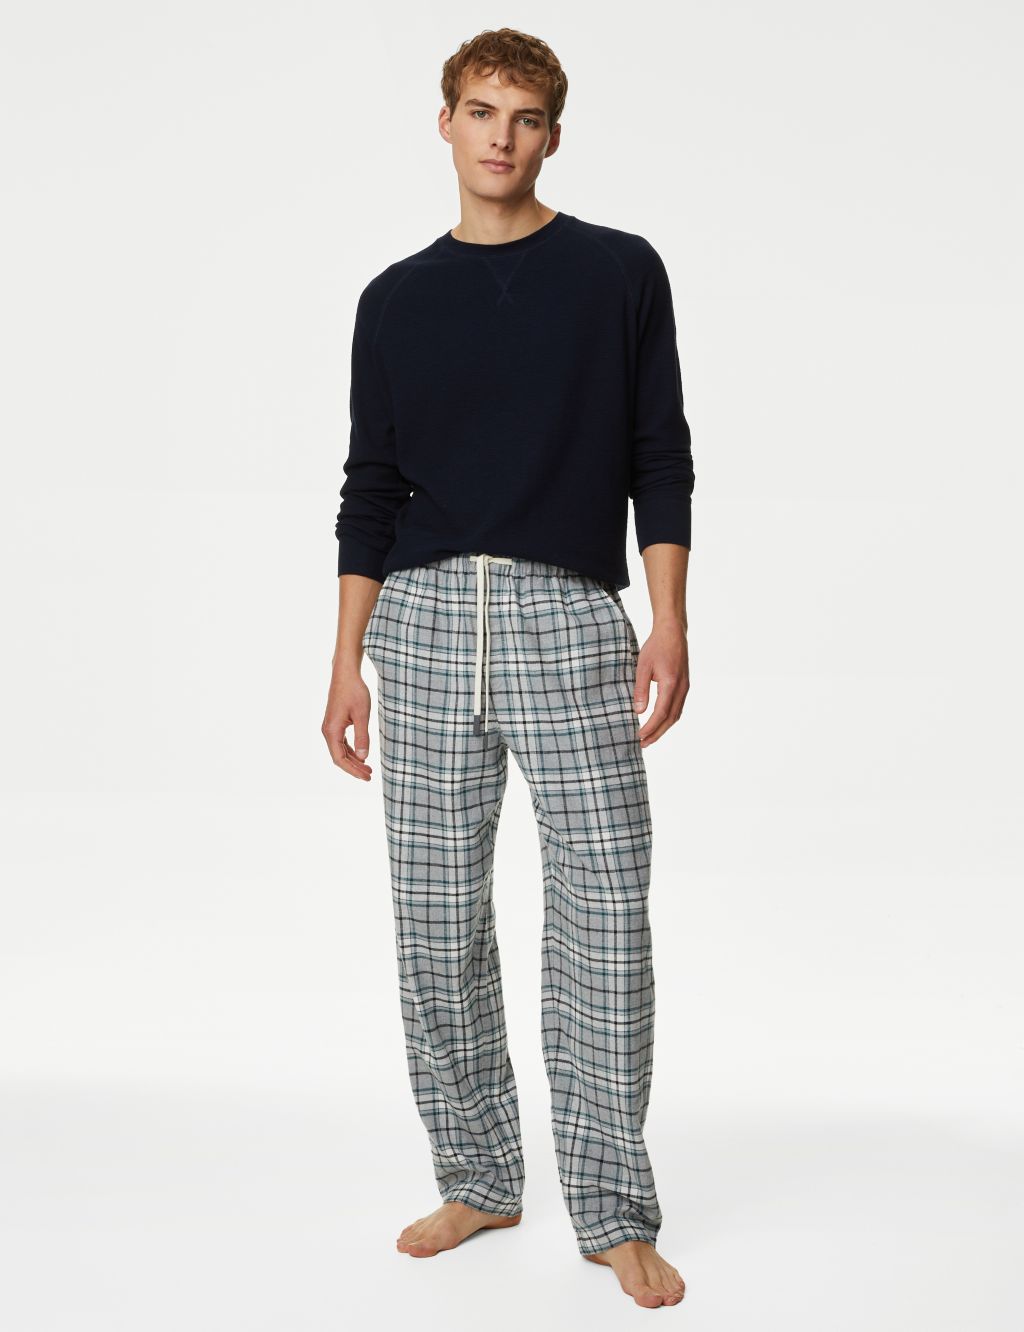 Brushed Cotton Checked Loungewear Bottoms image 1